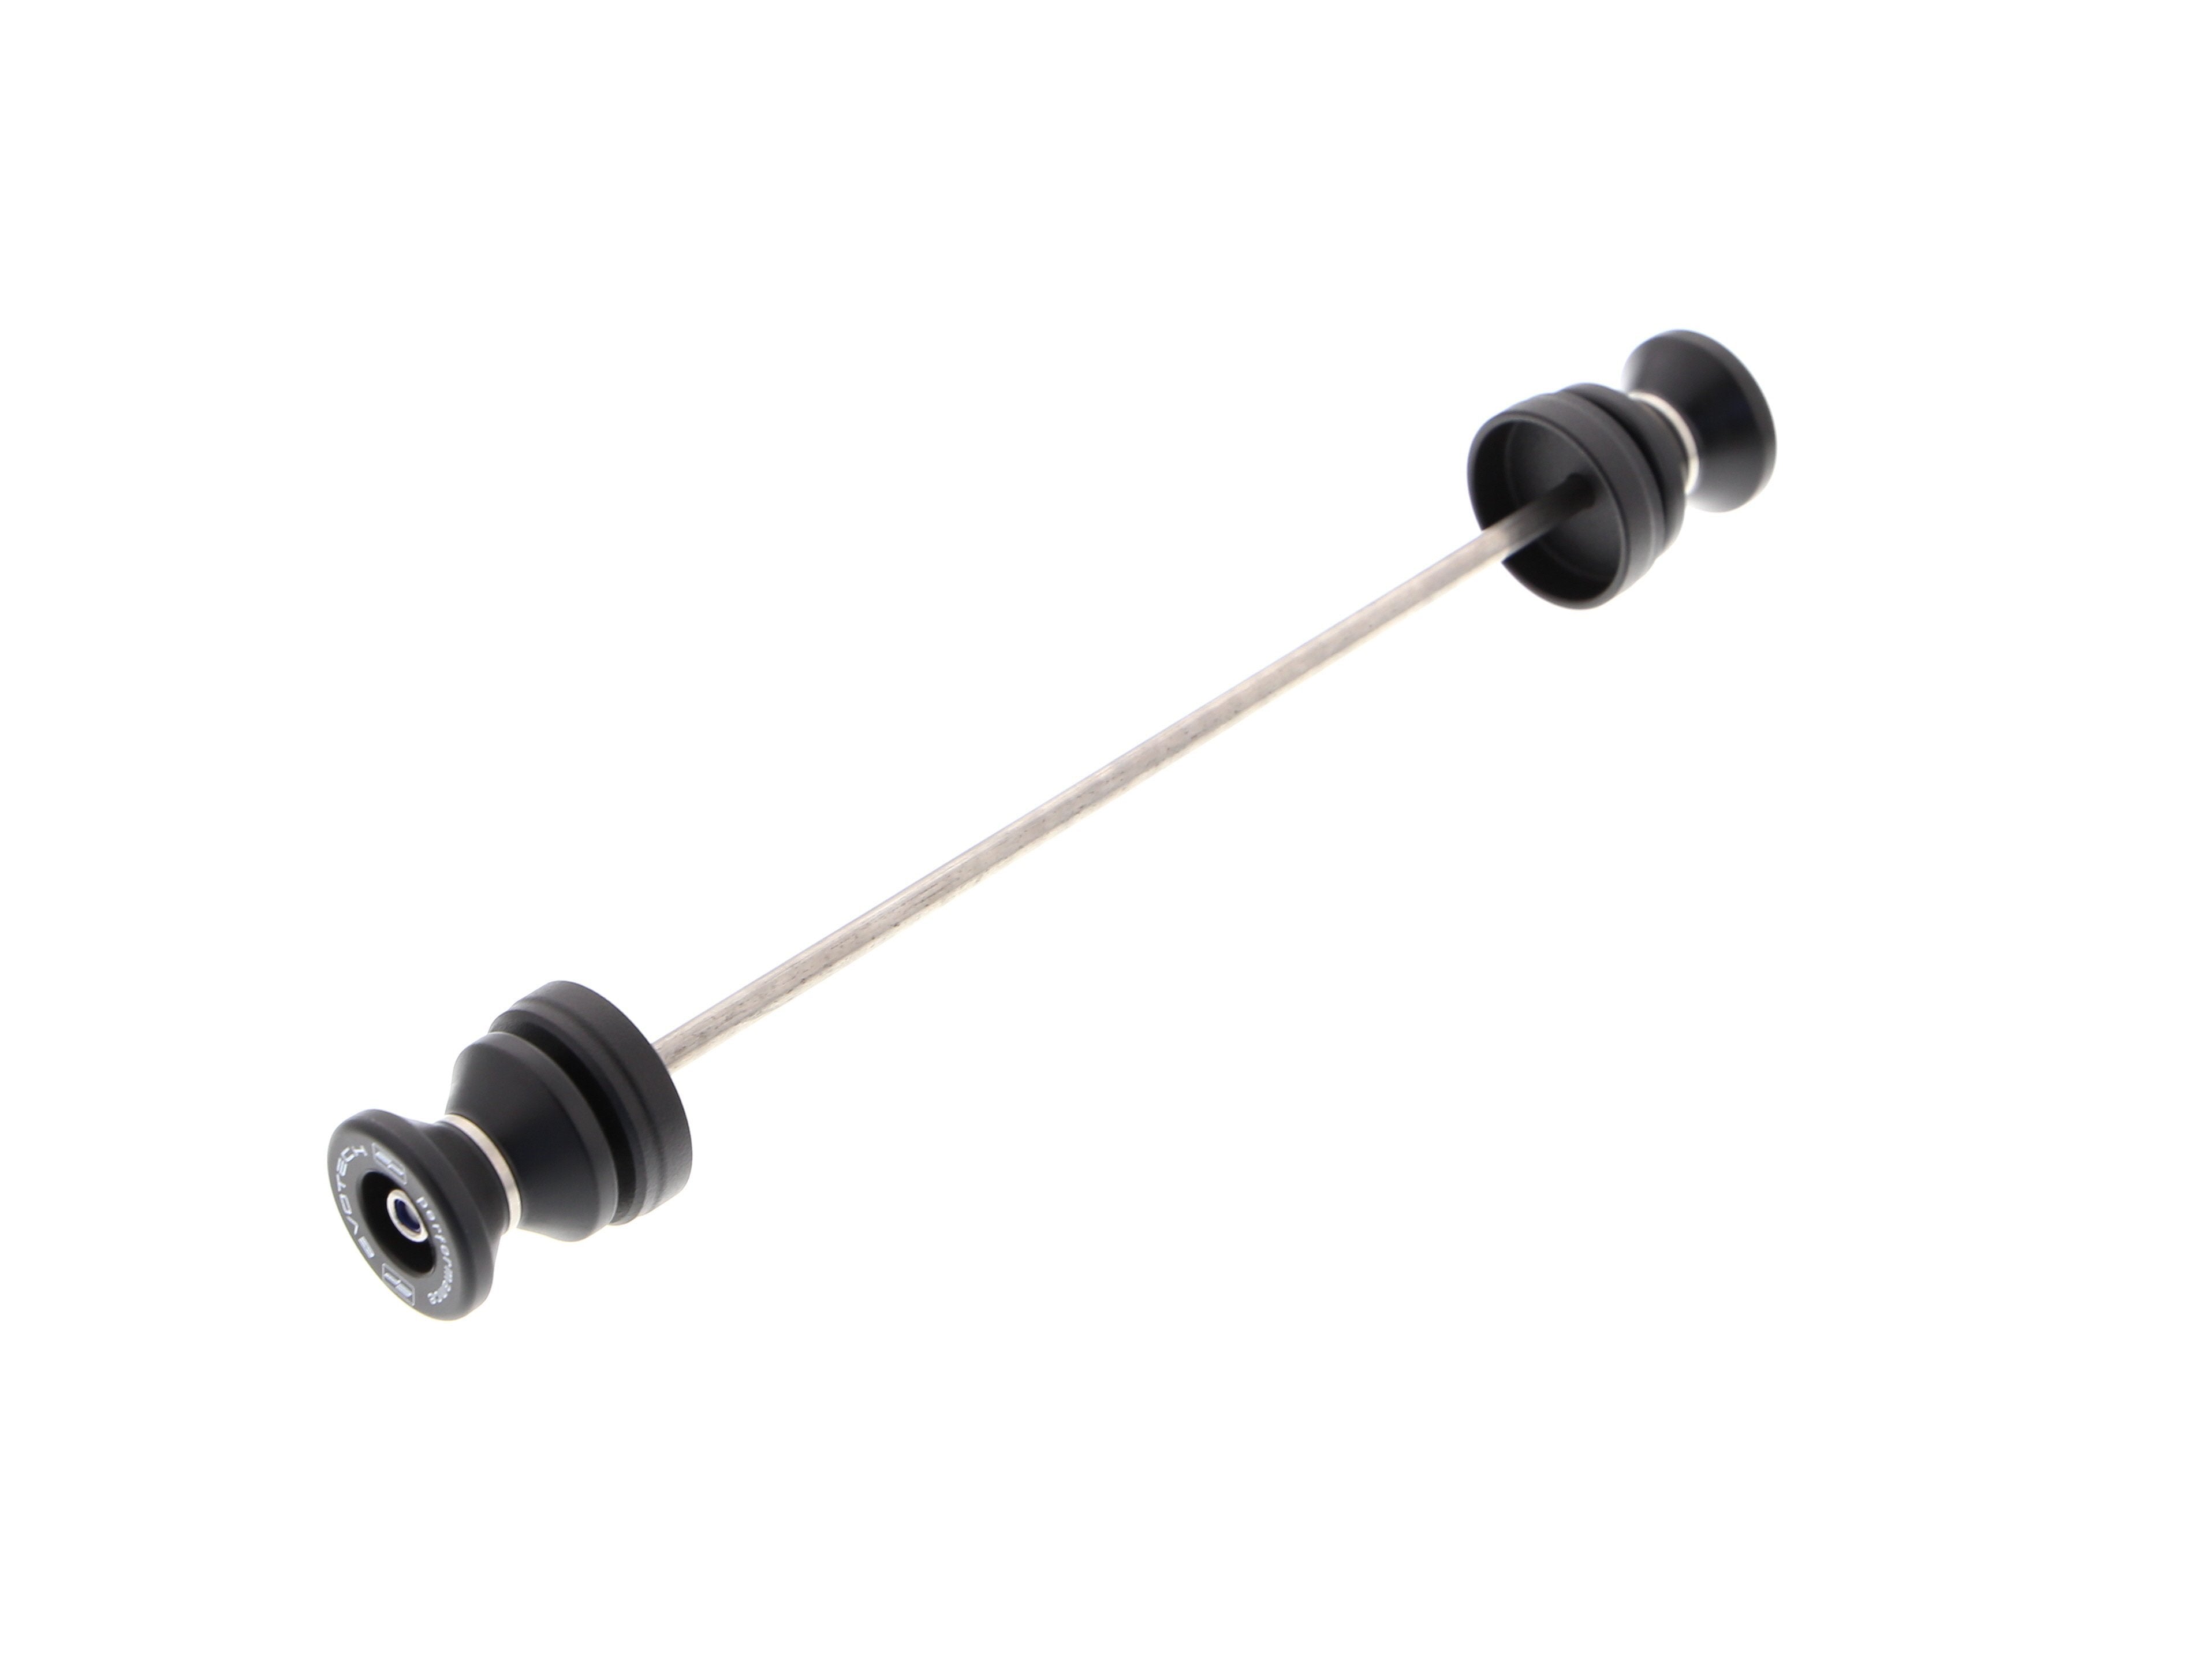 EP Paddock Stand Bobbins for the Ducati Scrambler CafÃ© Racer comprises a spindle rod with EPâs signature nylon paddock stand bobbins either end with precision shaped aluminium spacer.